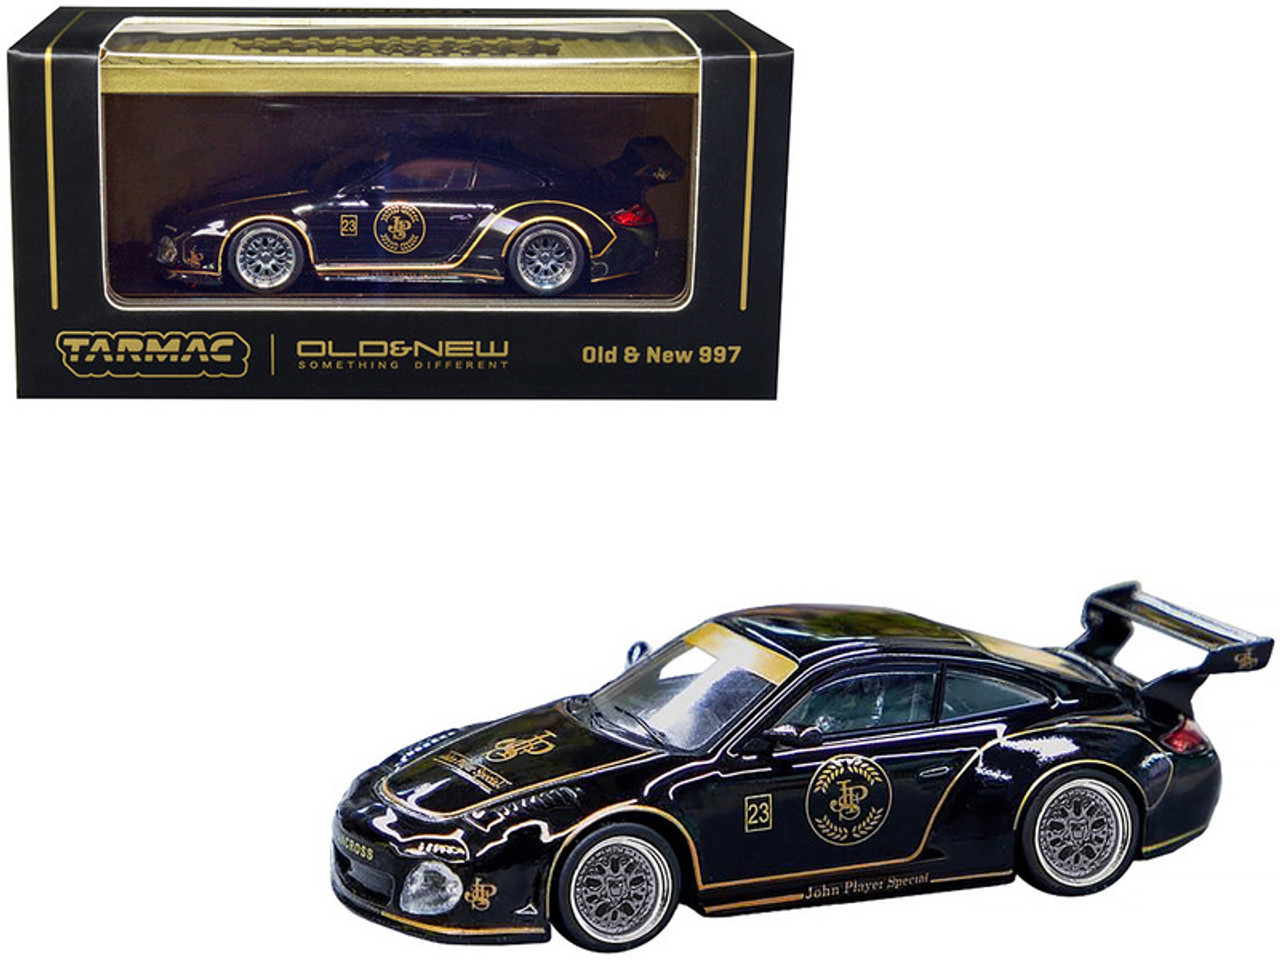 Porsche 997 Old & New Body Kit #23 Black with Gold Graphics "John Player Special" "Hobby64" Series 1/64 Diecast Model Car by Tarmac Works